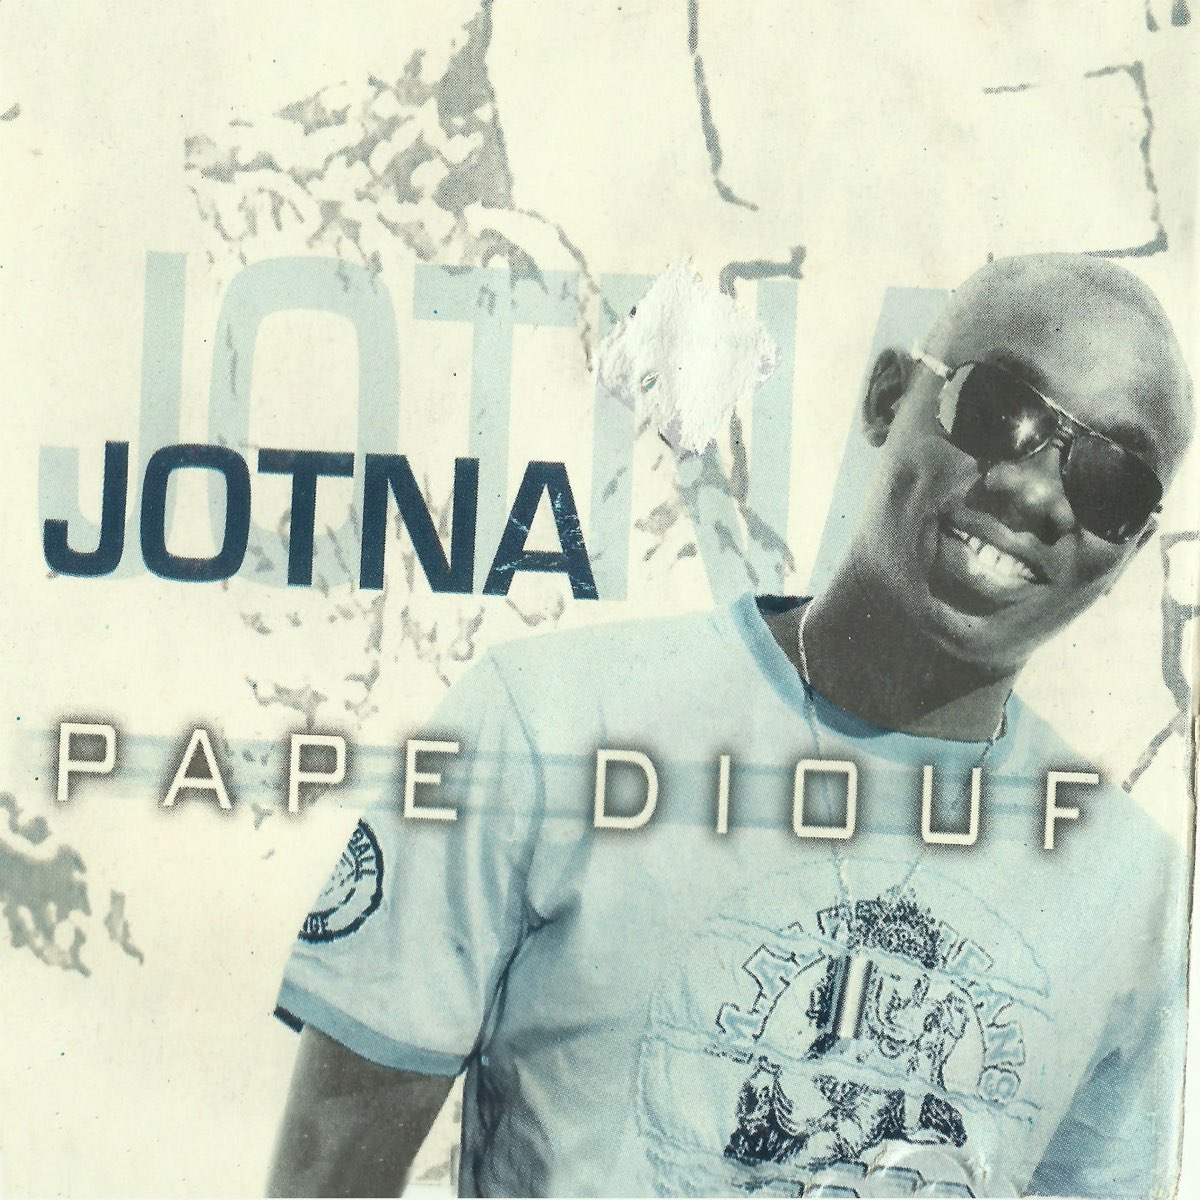 7 second coco pape diouf. 7 Seconds feat. Coco Pape Diouf. Joezi feat. Coco Pape Diouf 7 seconds.